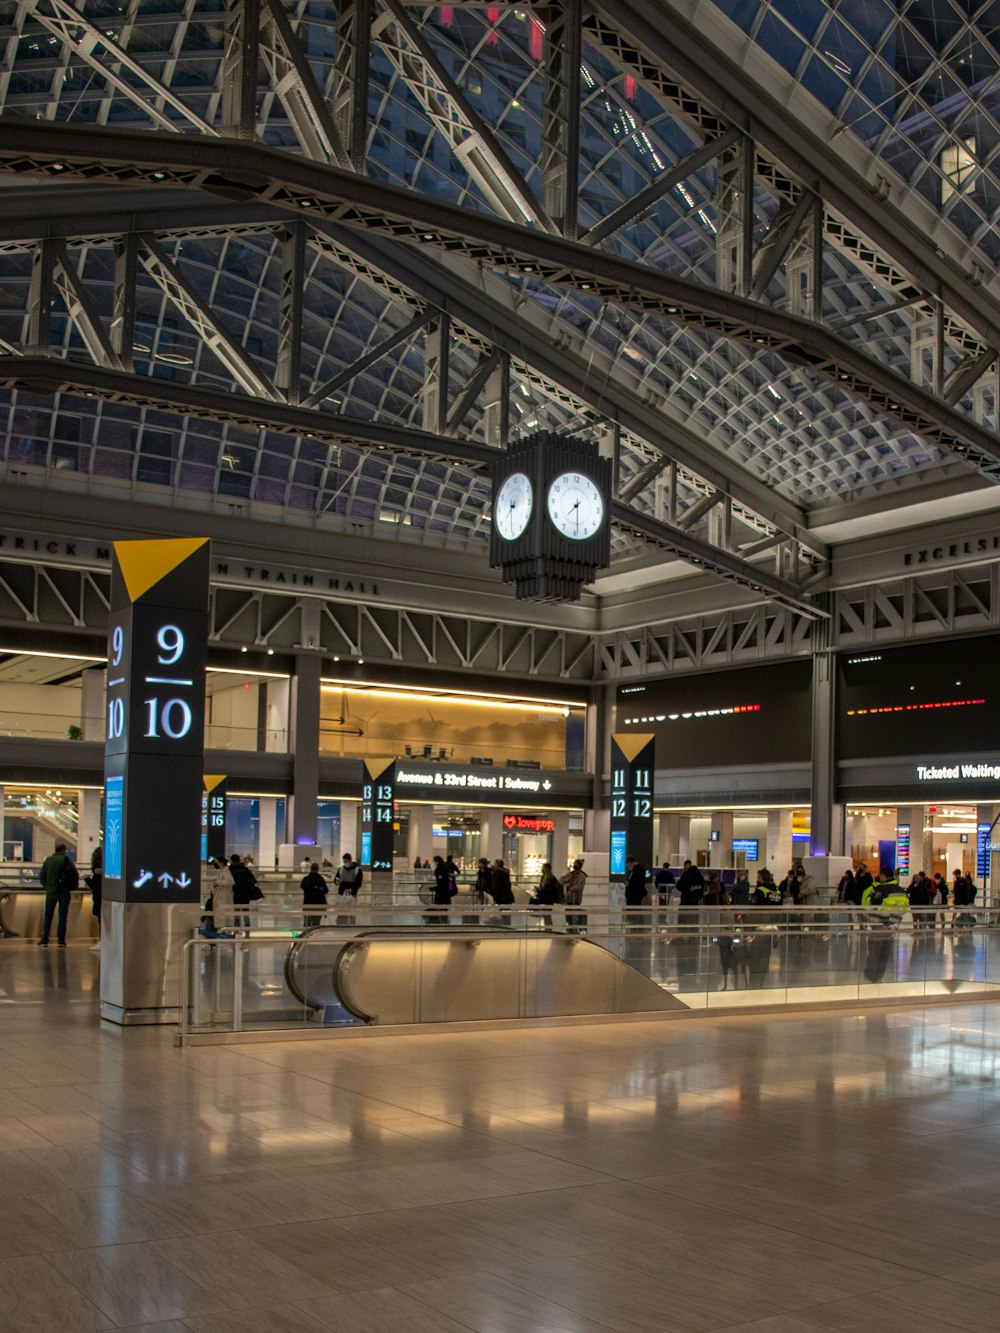 a large clock hangs from the ceiling of a large airport